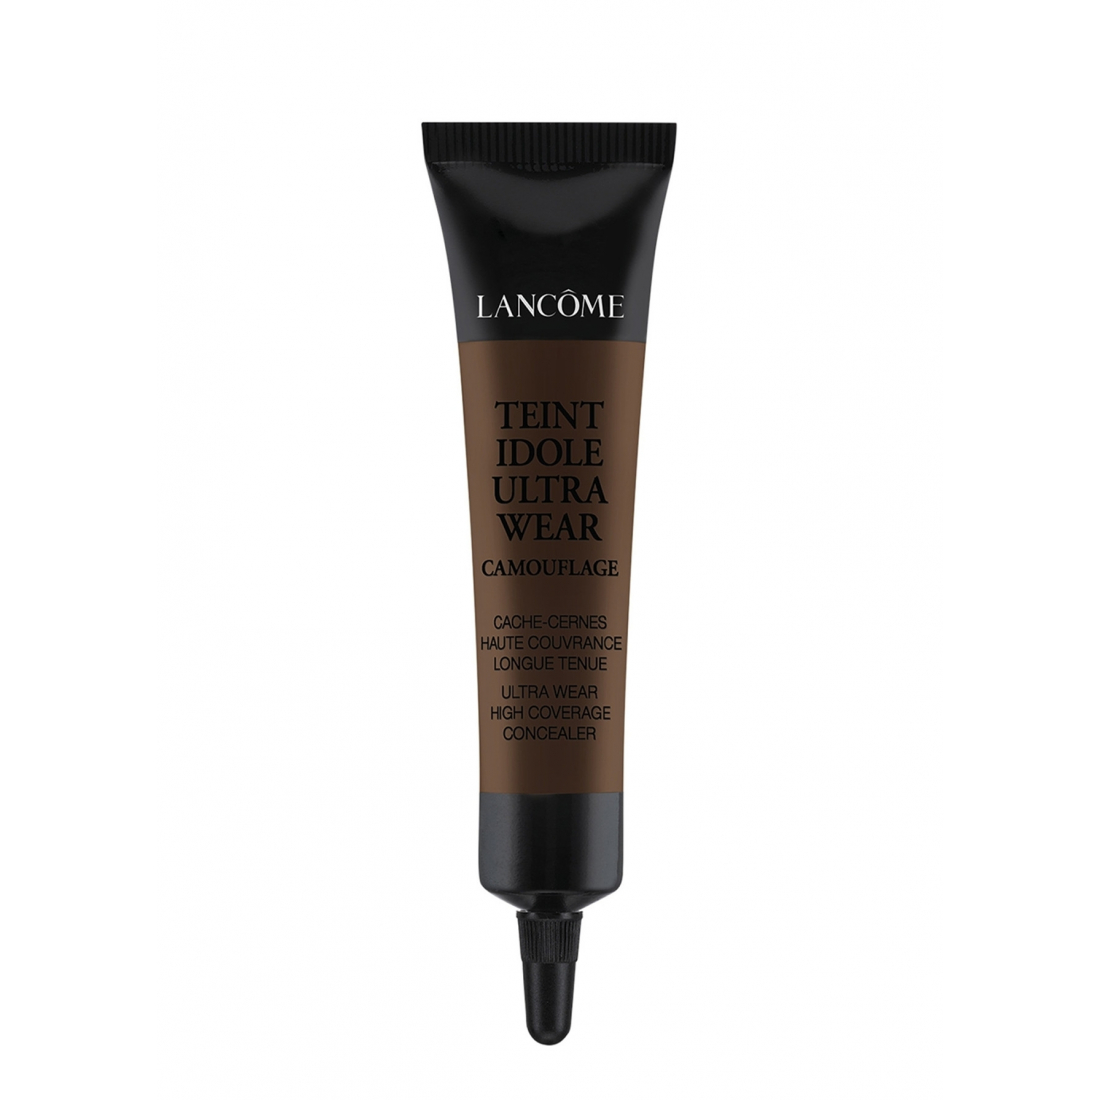 'Teint Idôle Ultra Wear Camouflage' Concealer - 555 Suede C 12 ml